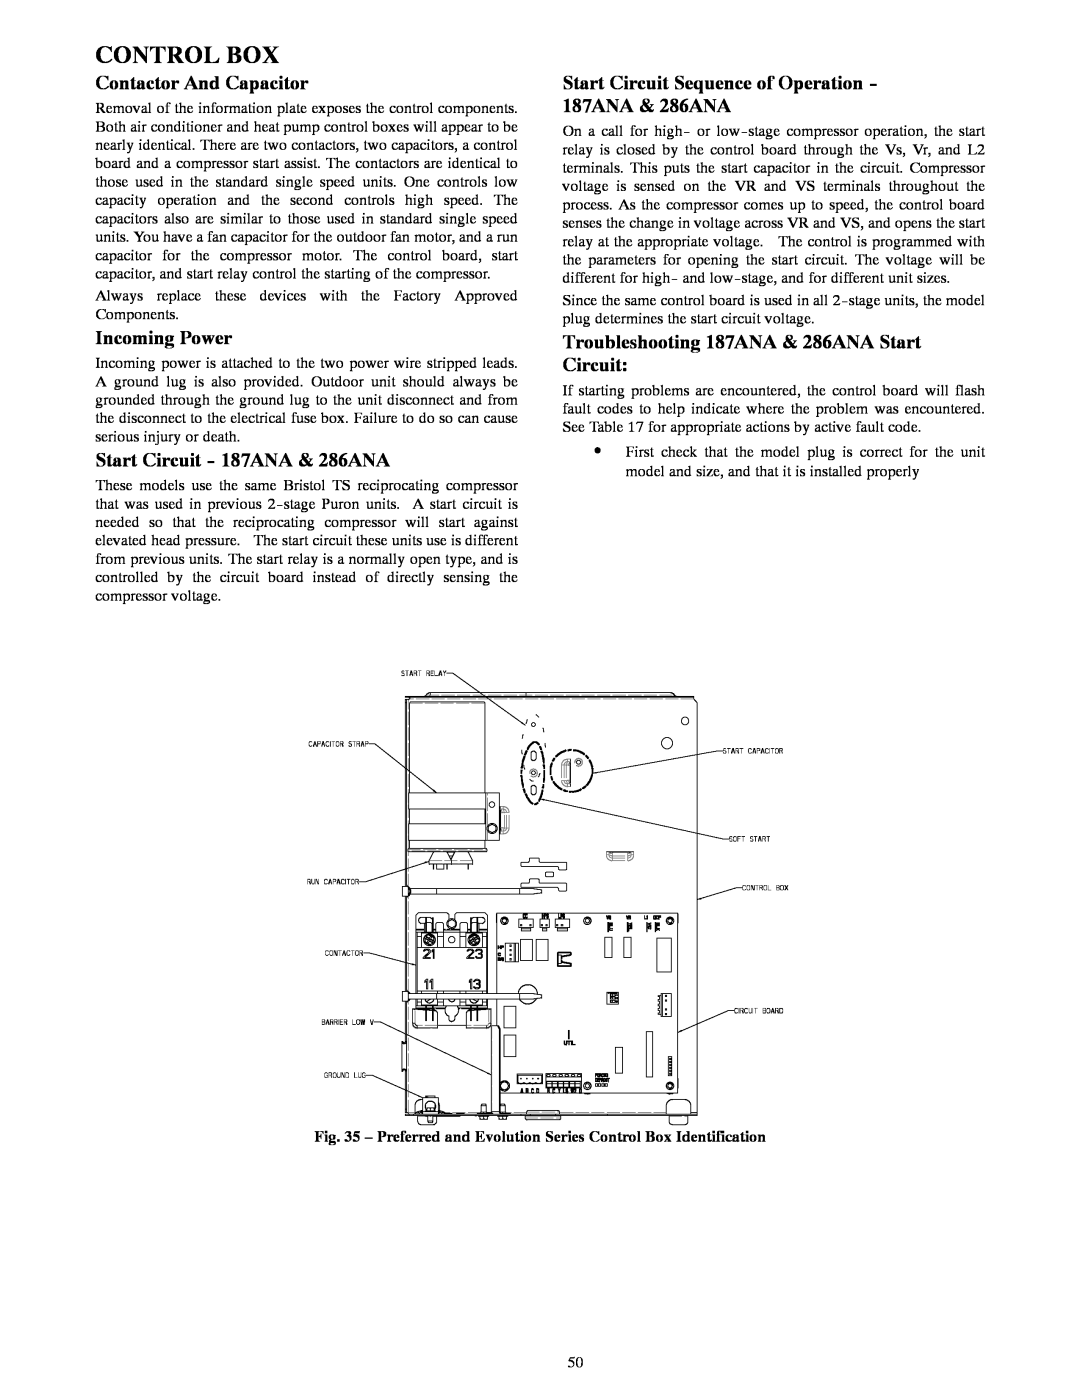 Bryant R-22 service manual Control Box, Contactor And Capacitor, Incoming Power, Start Circuit - 187ANA & 286ANA 